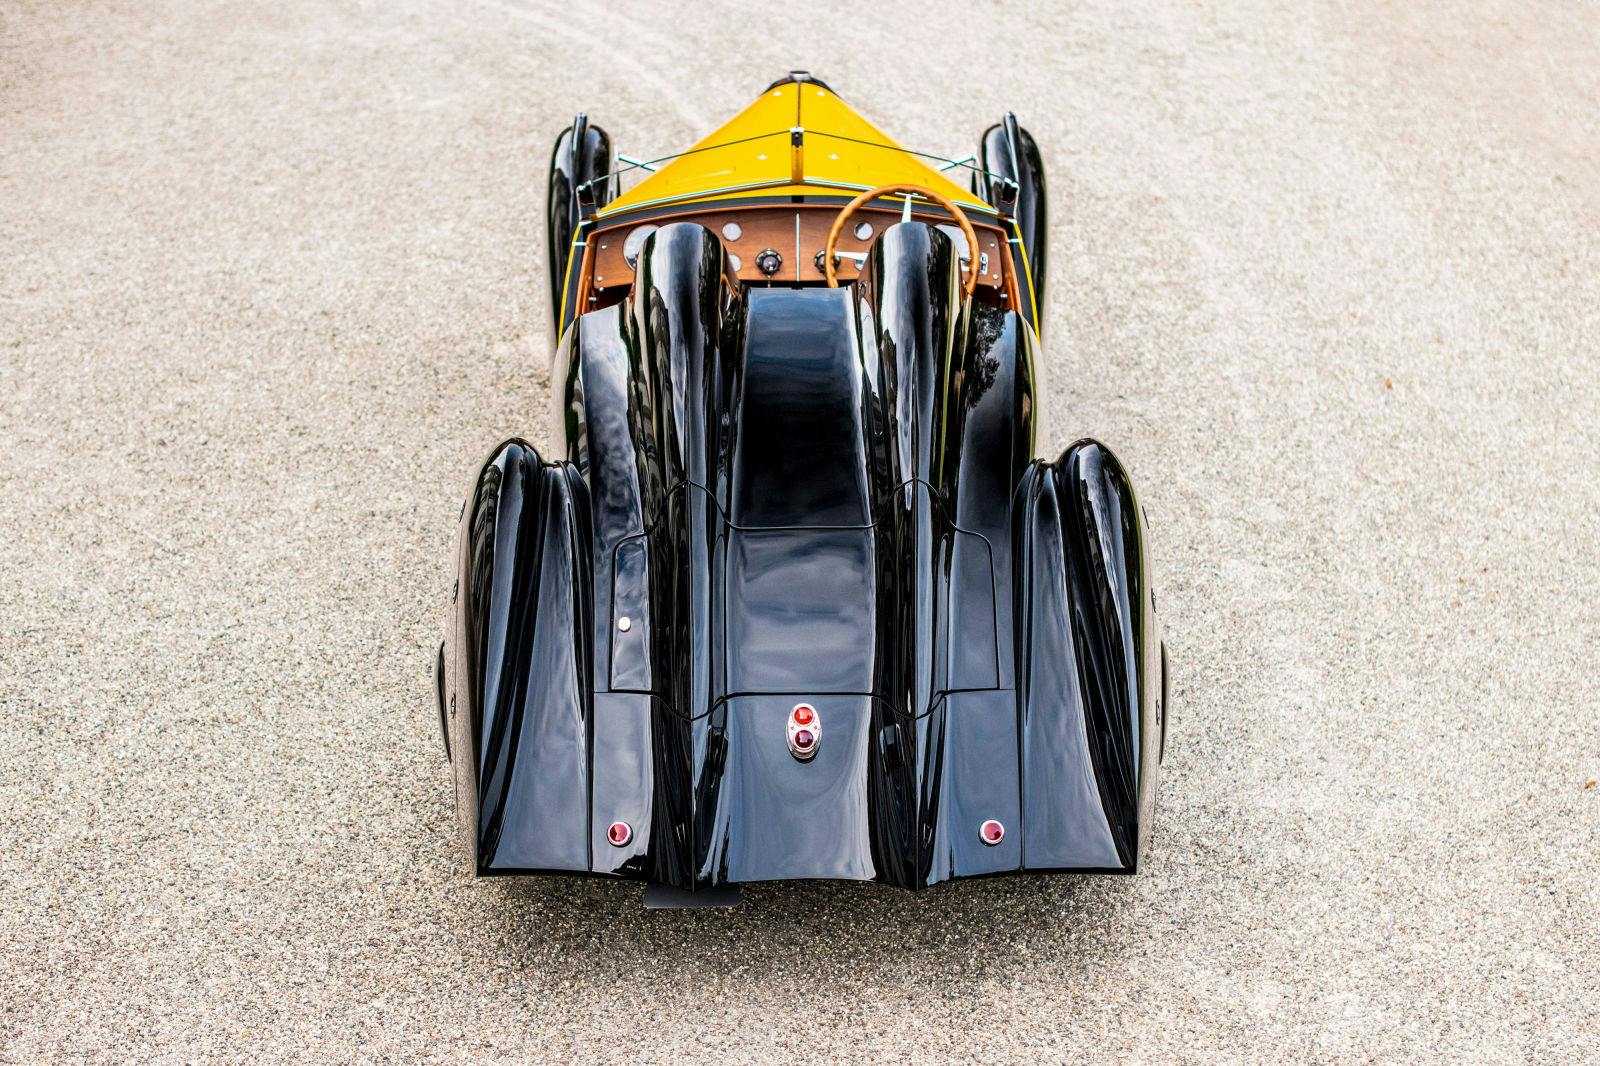 The Type 57 Roadster Grand Raid Usine and its streamlined and elongated fenders were designed to race.